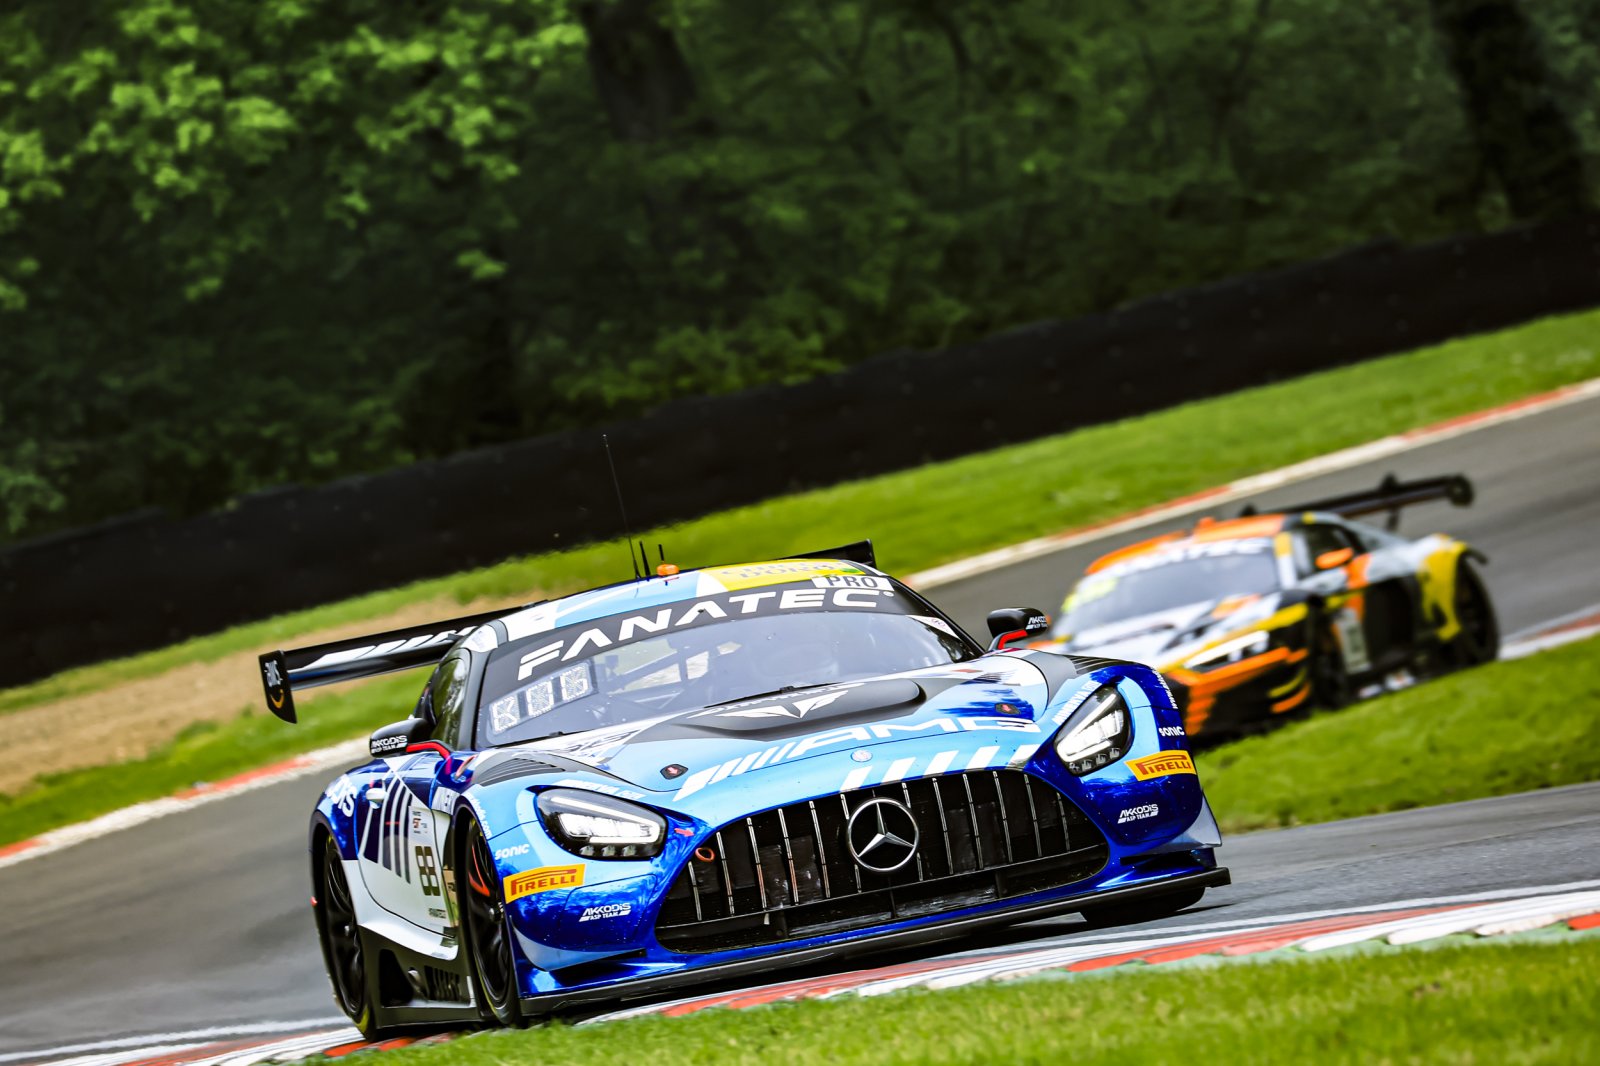 Marciello fastest in opening practice at Brands Hatch as 2023 Sprint Cup season gets underway